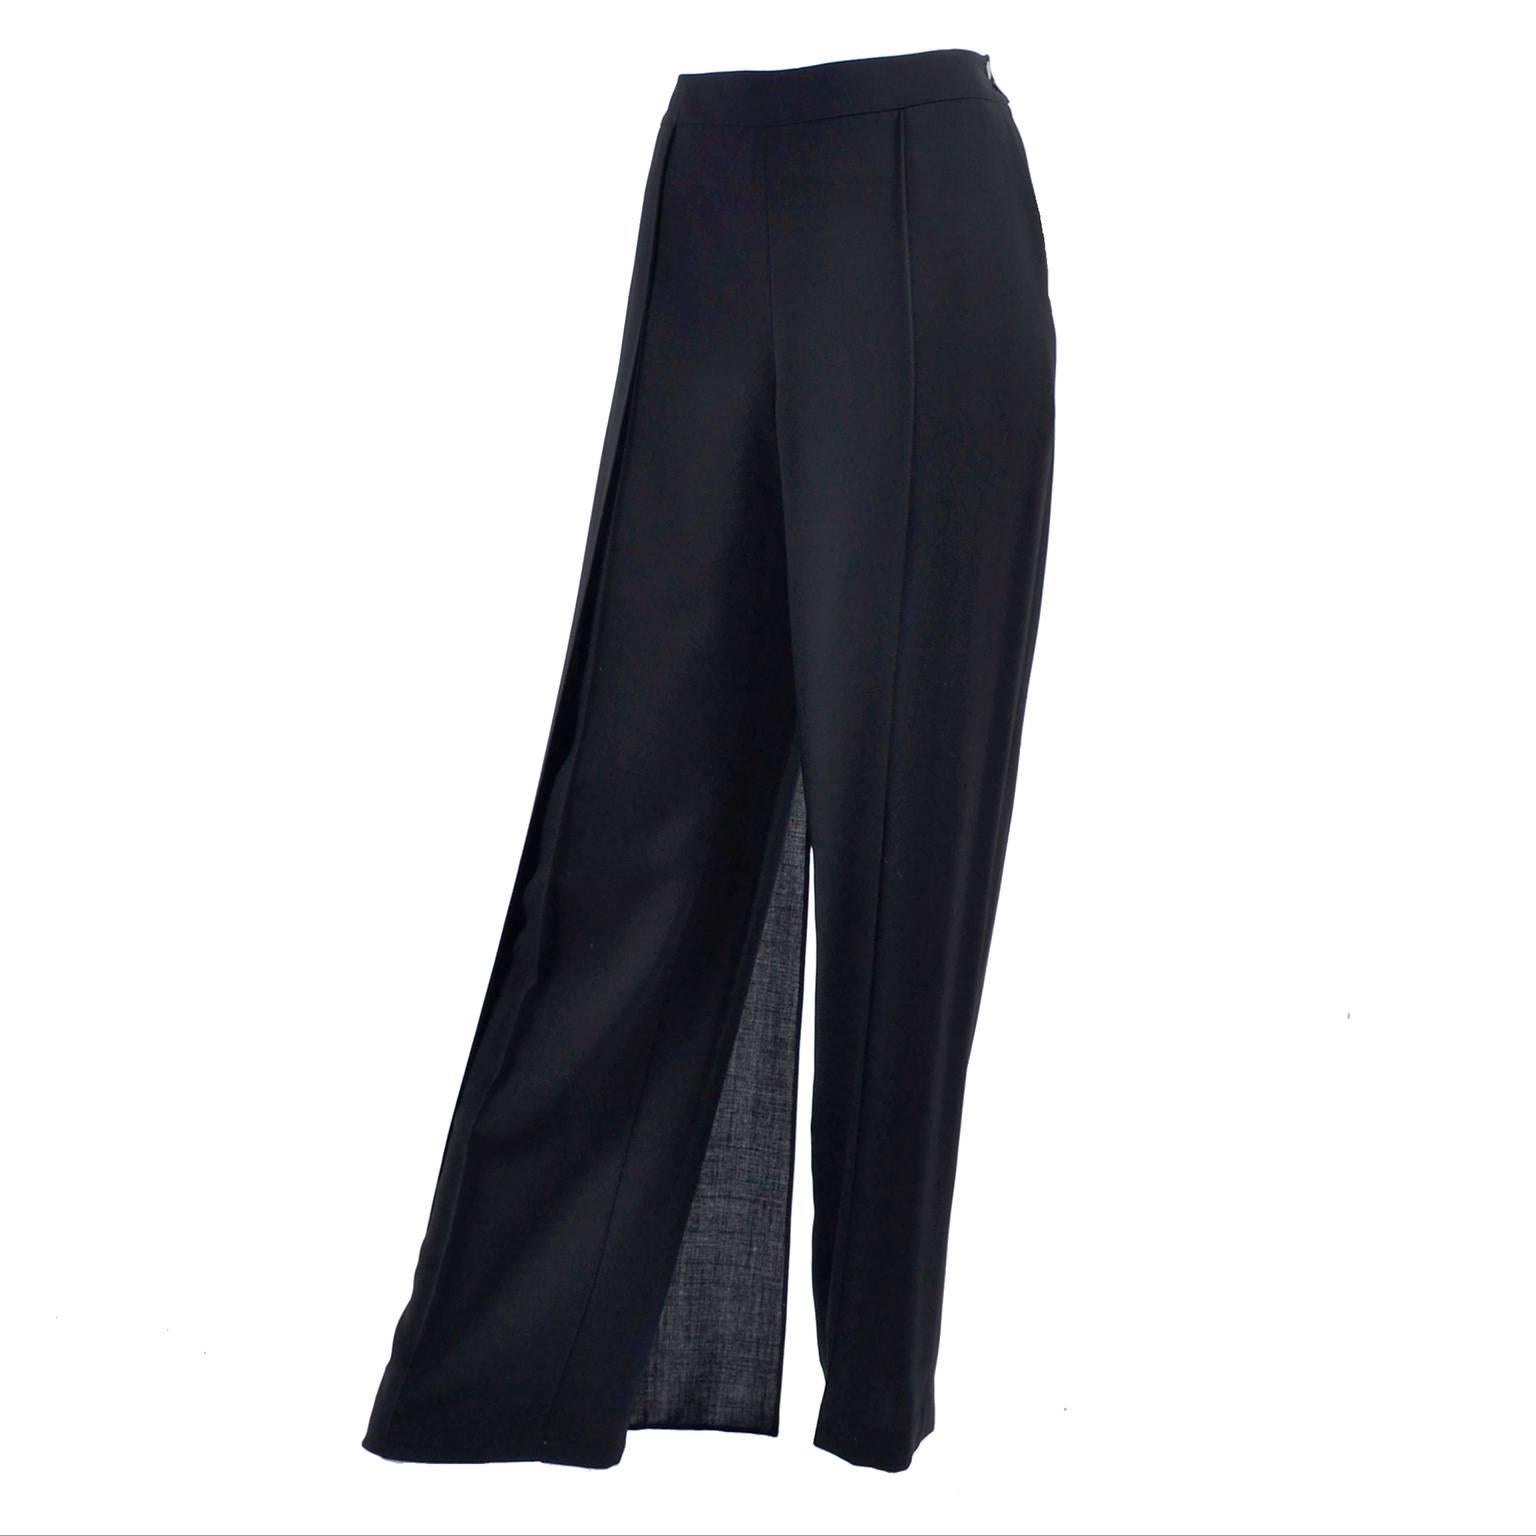 New 1990s Black Wool Chanel Pants W High Waist & Side Fly Away Panel 40 US 10 For Sale